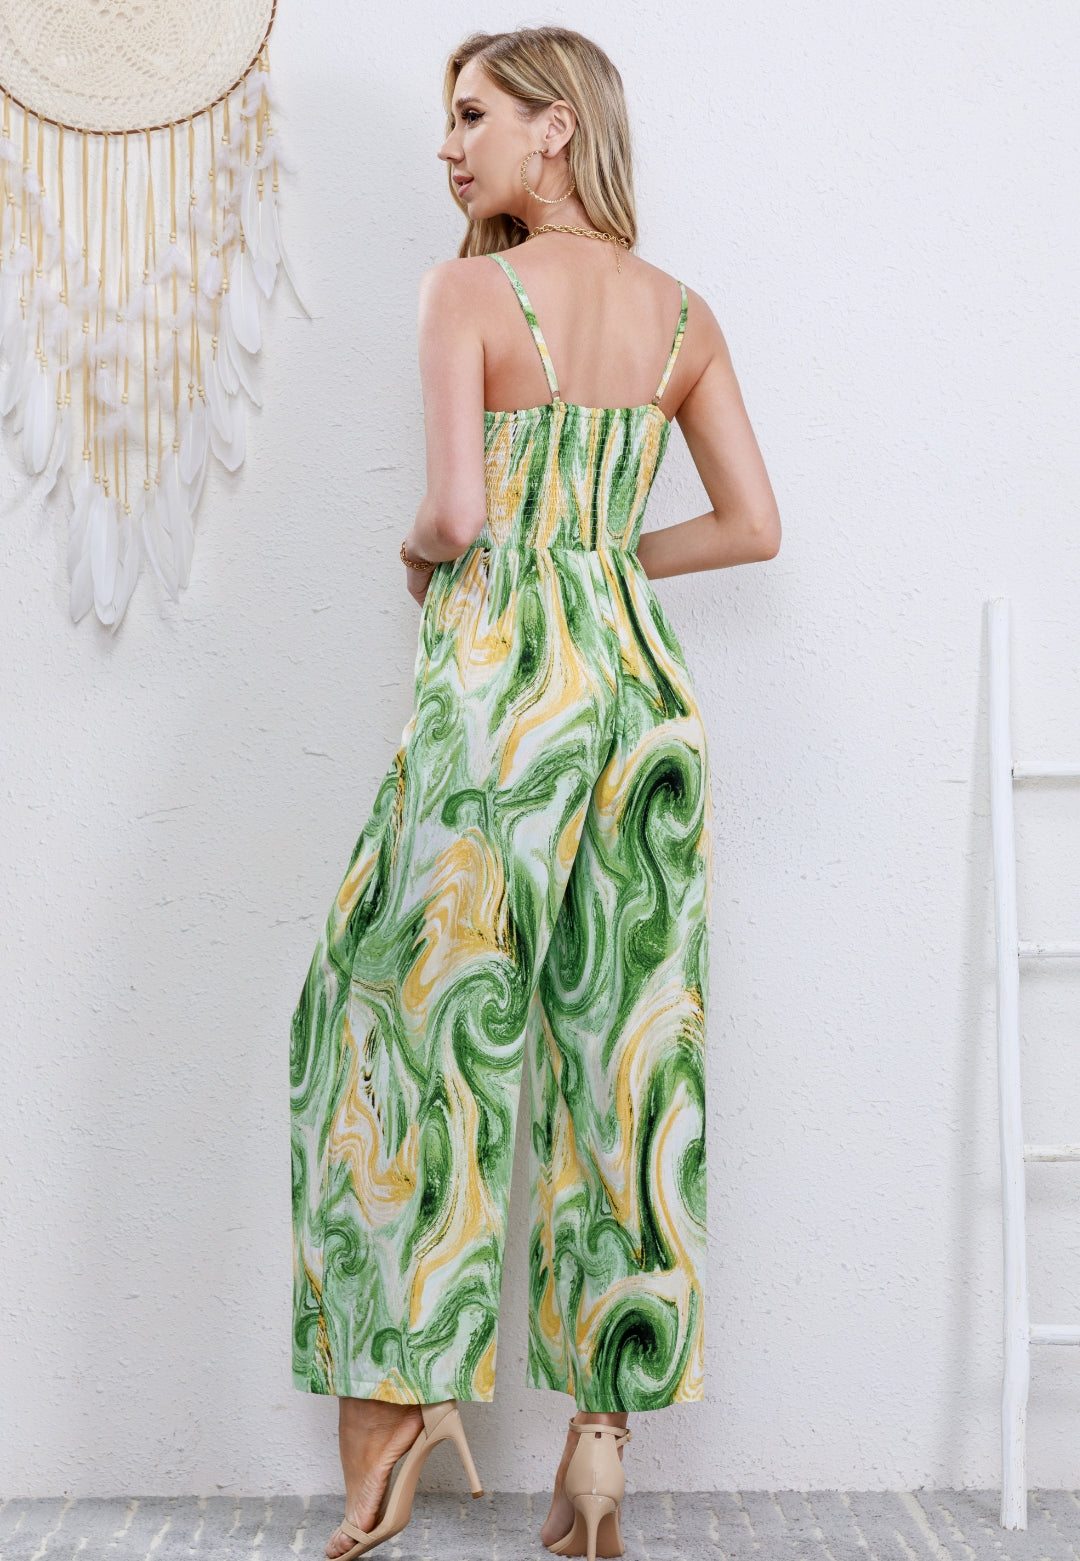 WAVES JUMPSUIT - YELLOW / GREEN